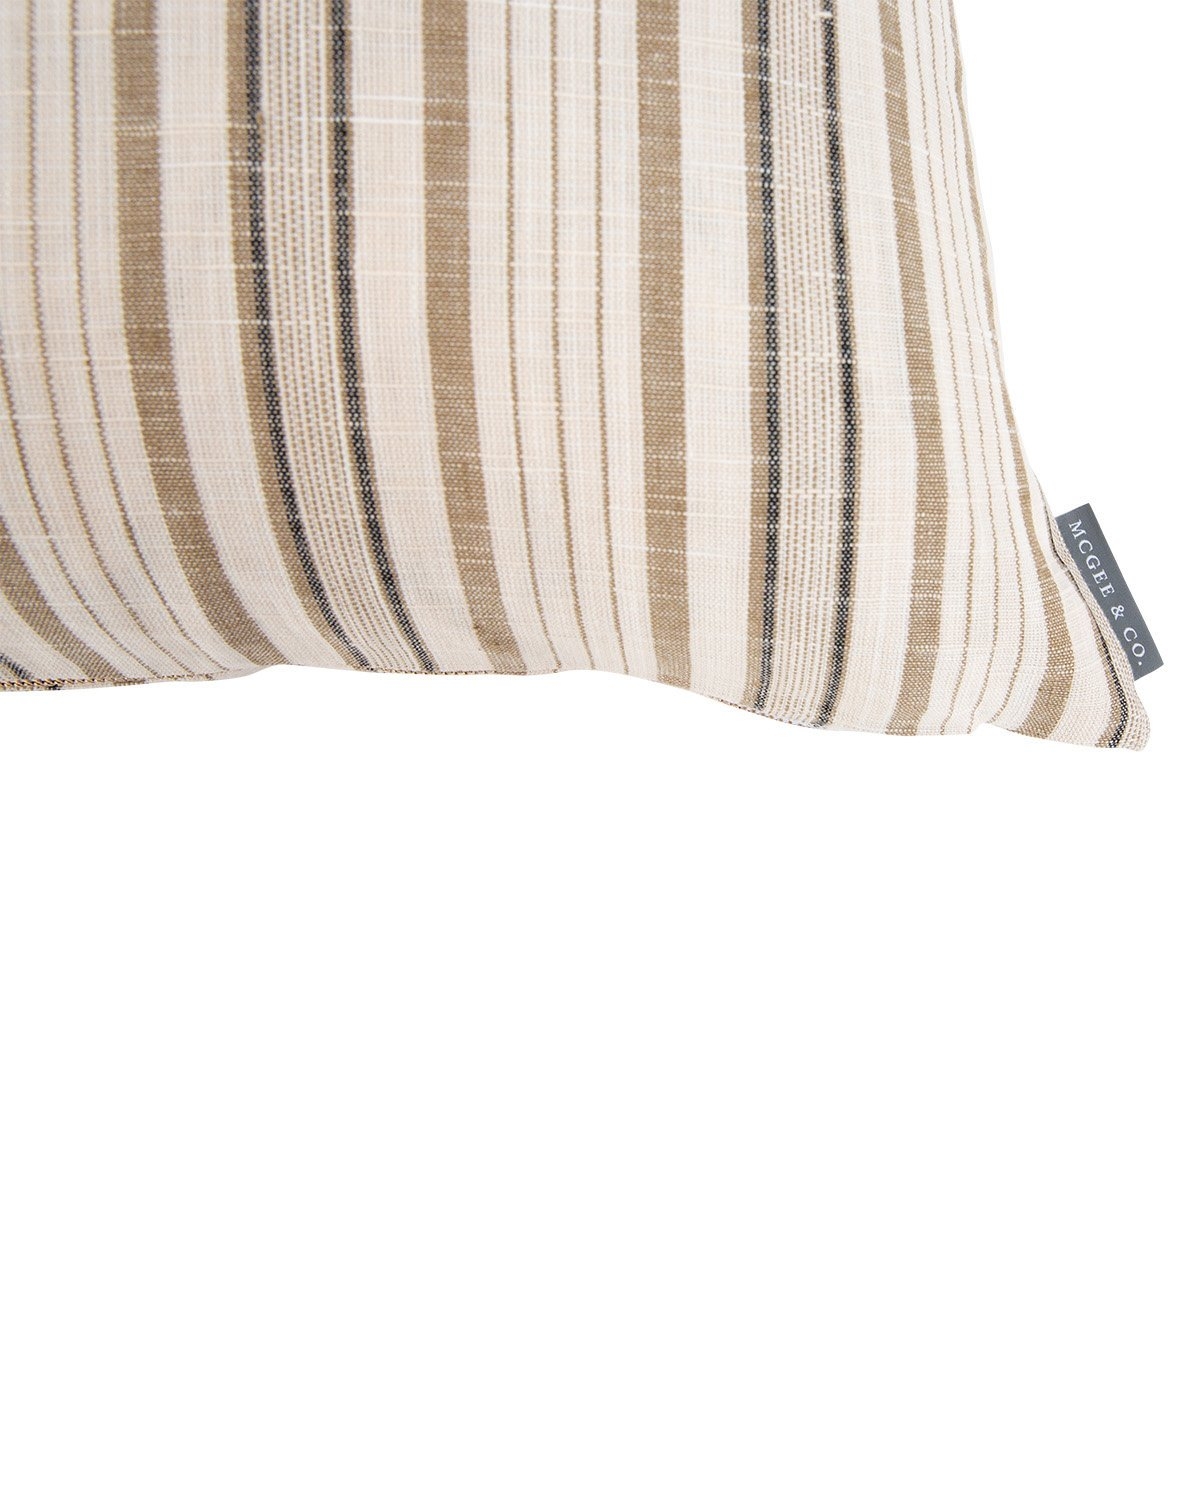 ARCHIE PILLOW WITHOUT INSERT, CAMEL, 12" x 24" - Image 1